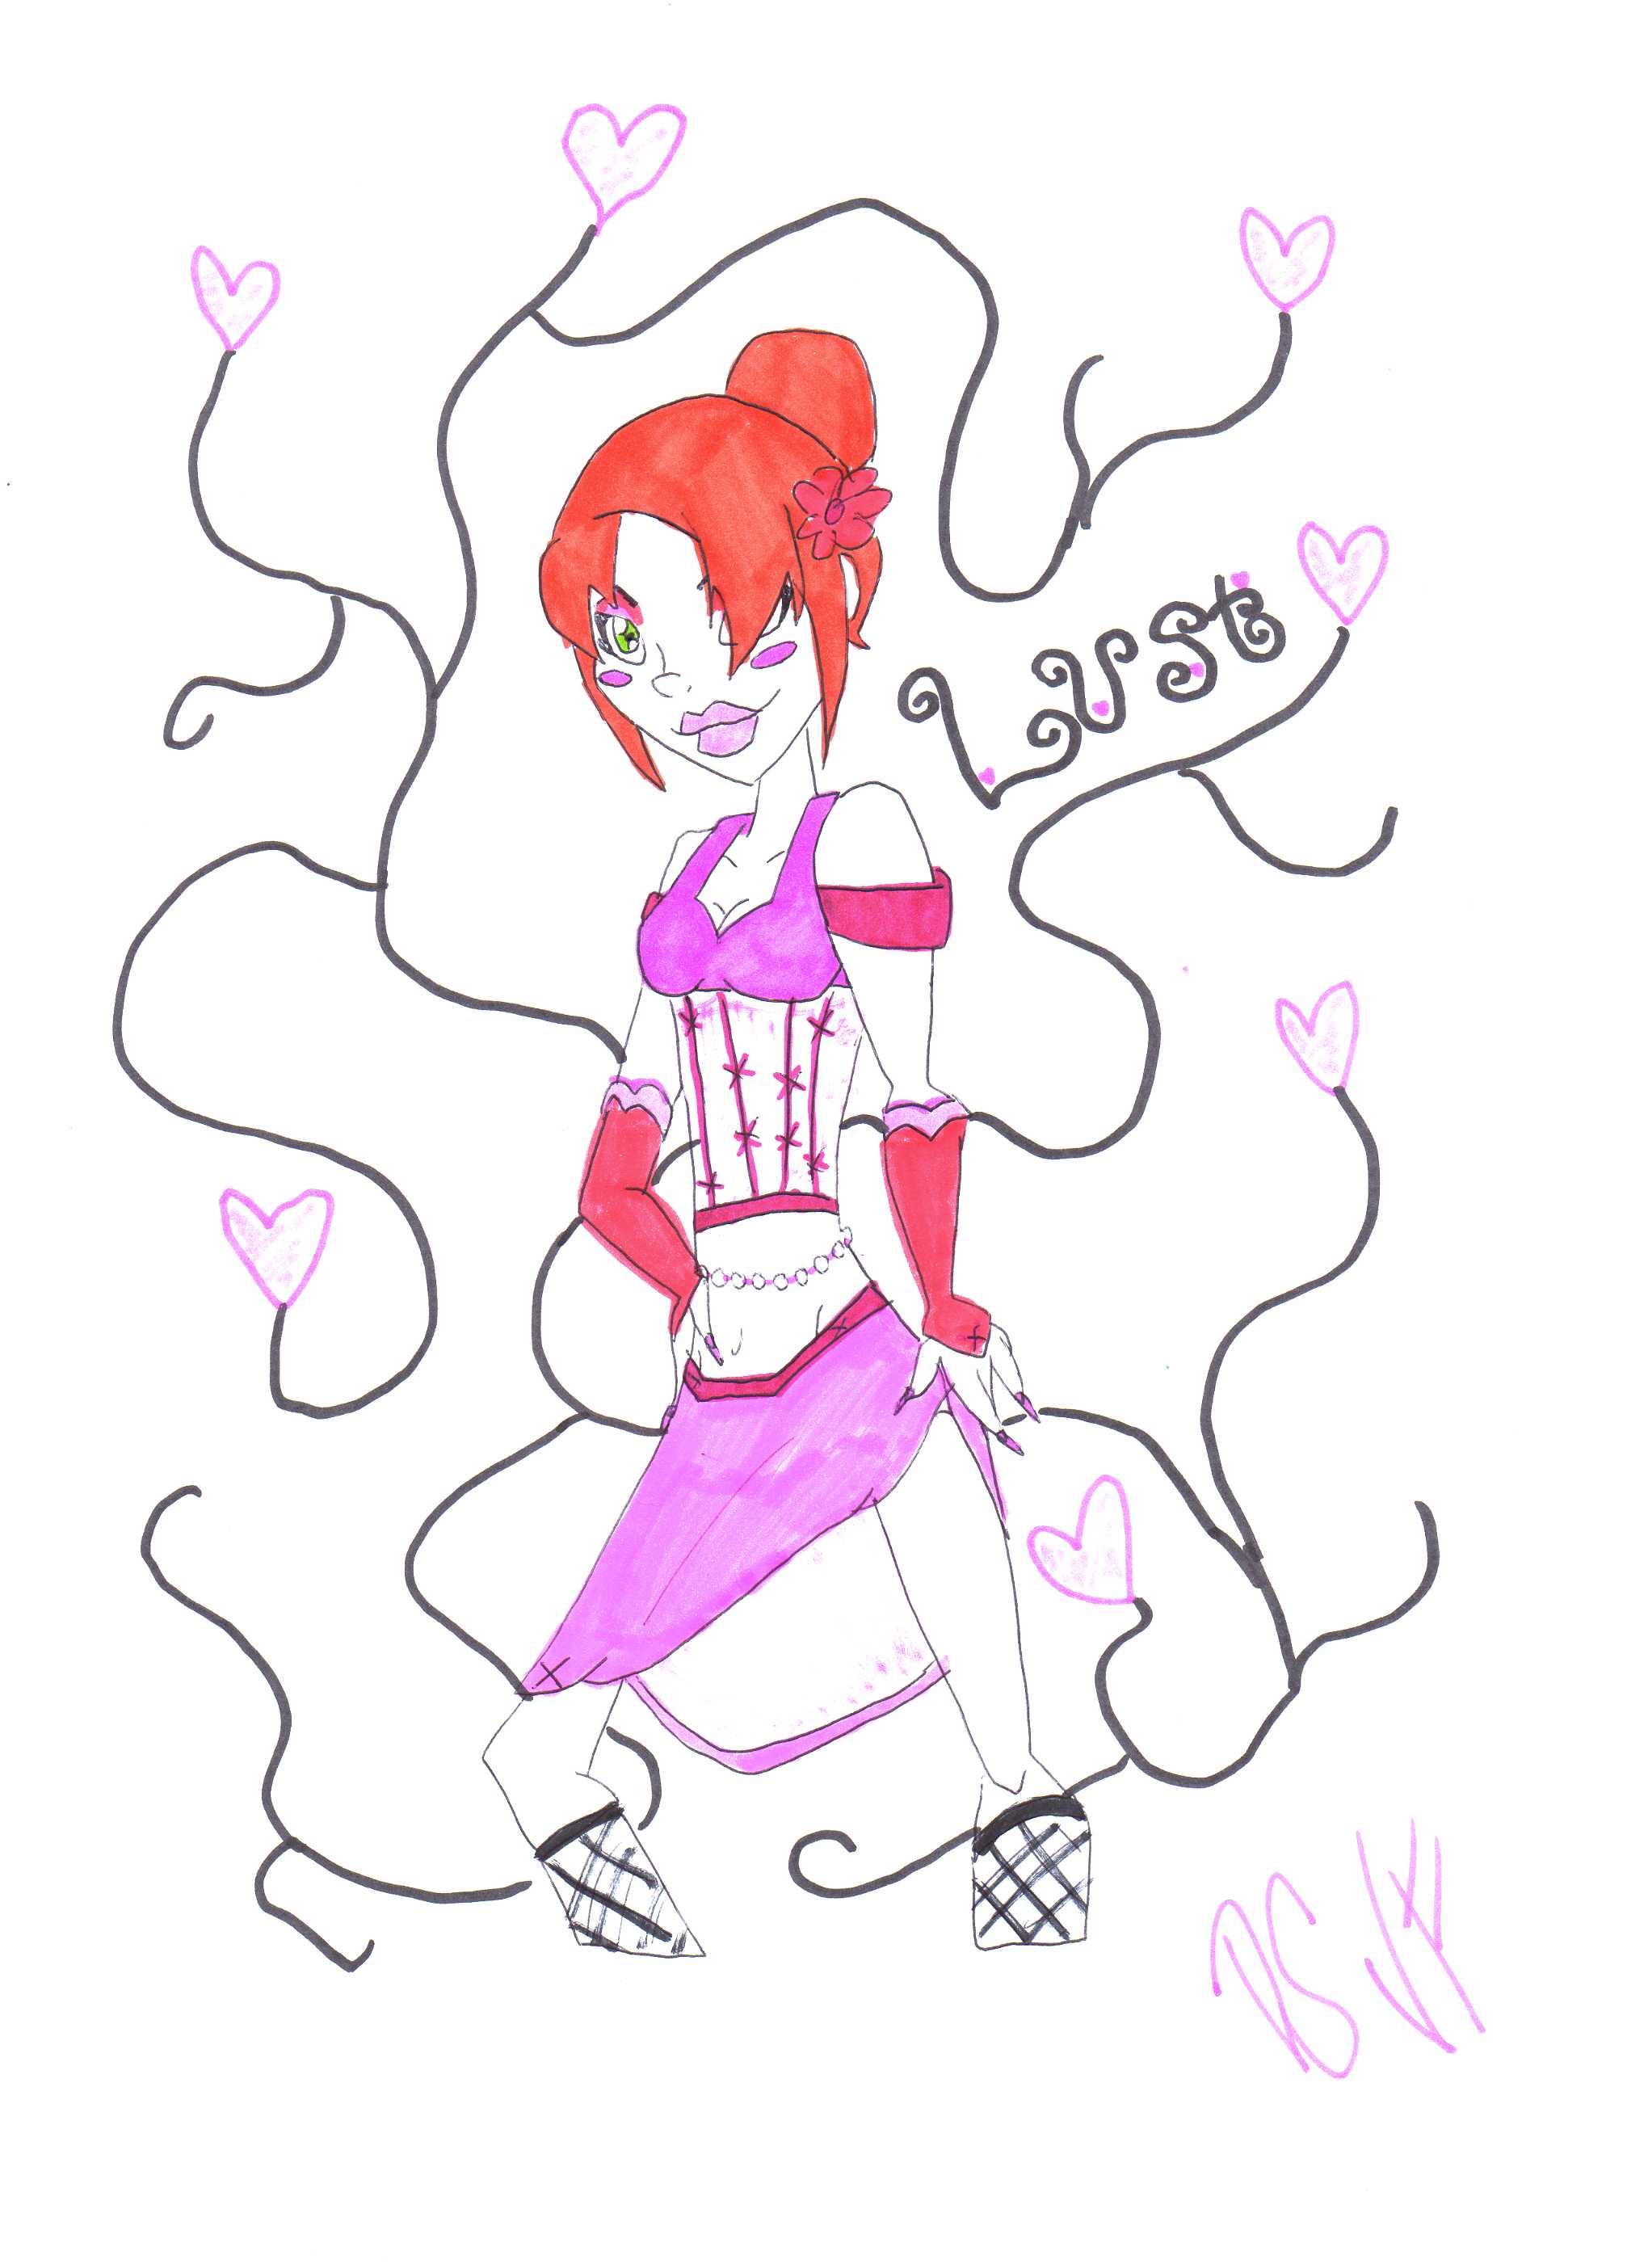 DEADLY SIN CONTEST-Starfire; Lust by violetflowers17